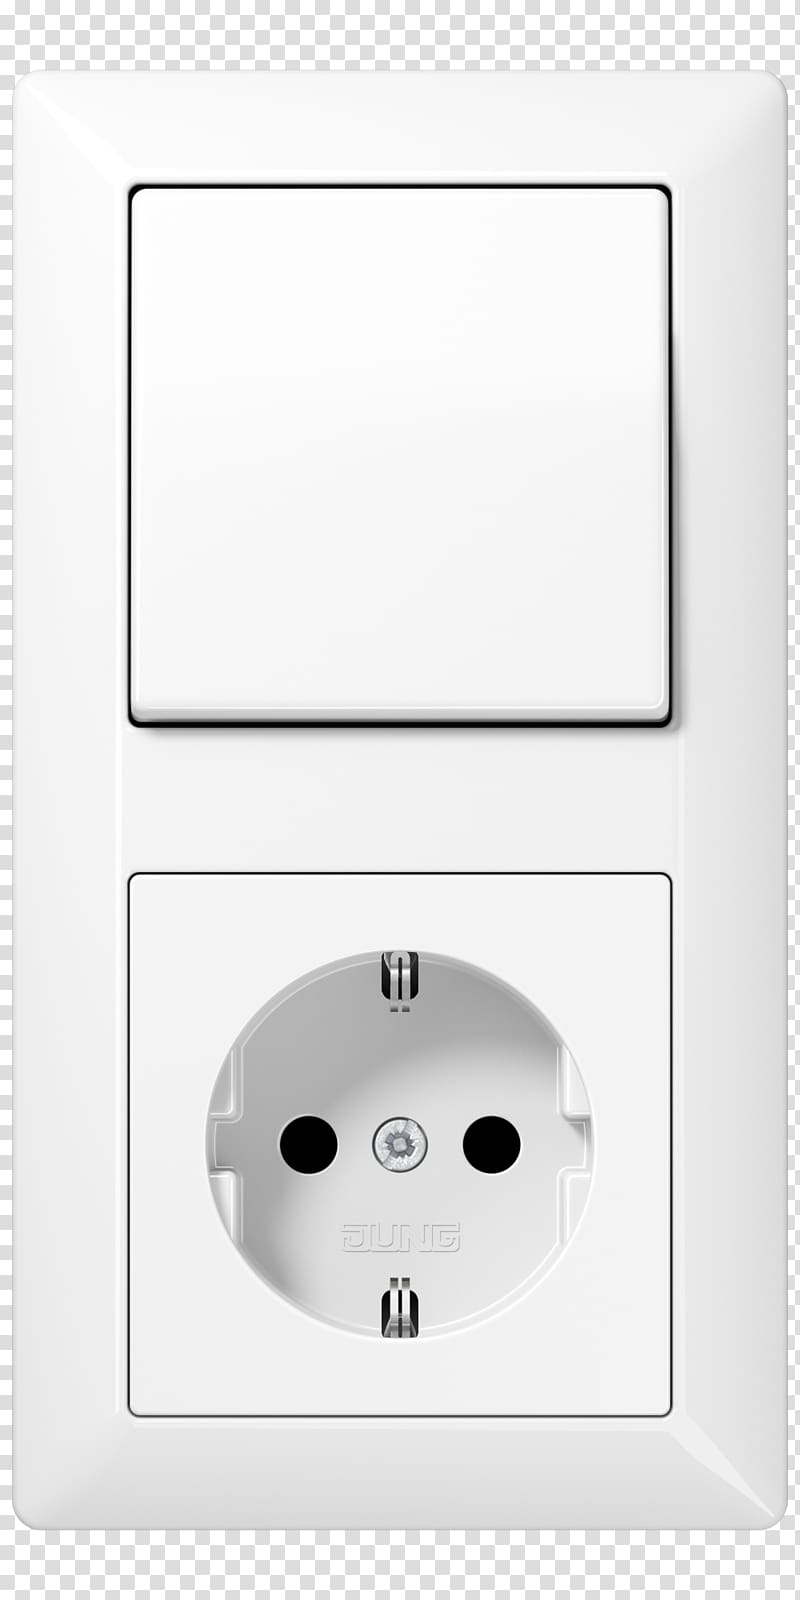 AC power plugs and sockets Jung Electrical Switches Berker Gira, White Package Design transparent background PNG clipart